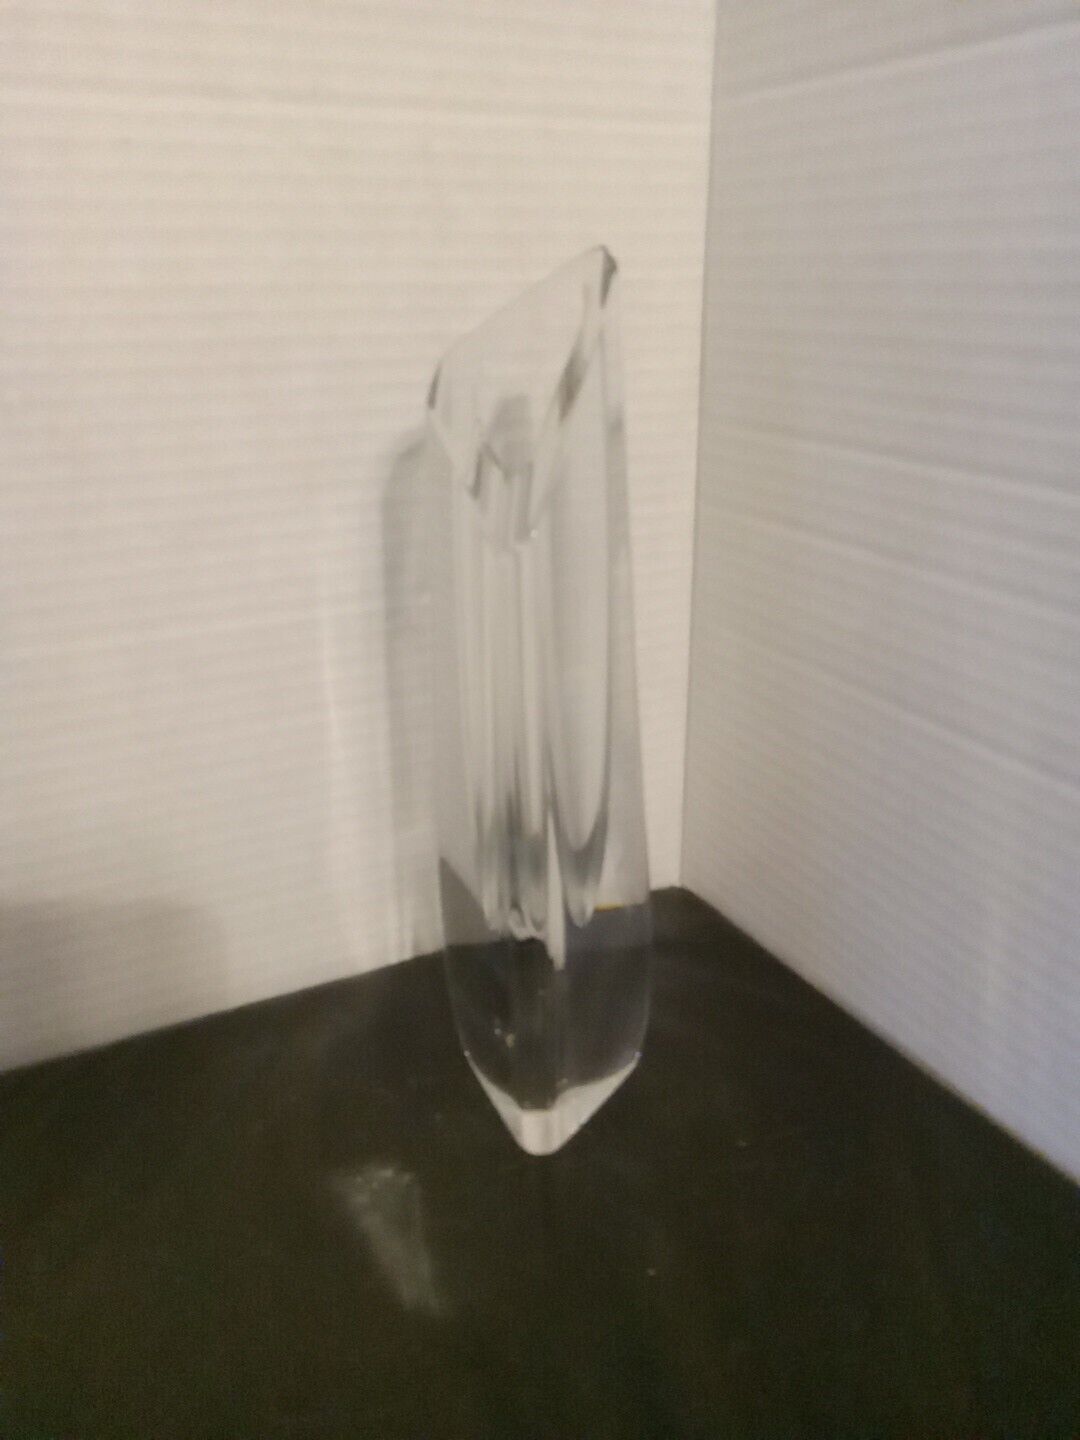 Beautiful Baccarat Crystal Rose Bud Vase Signed 9 Inches Tall. 2 Small Chips.